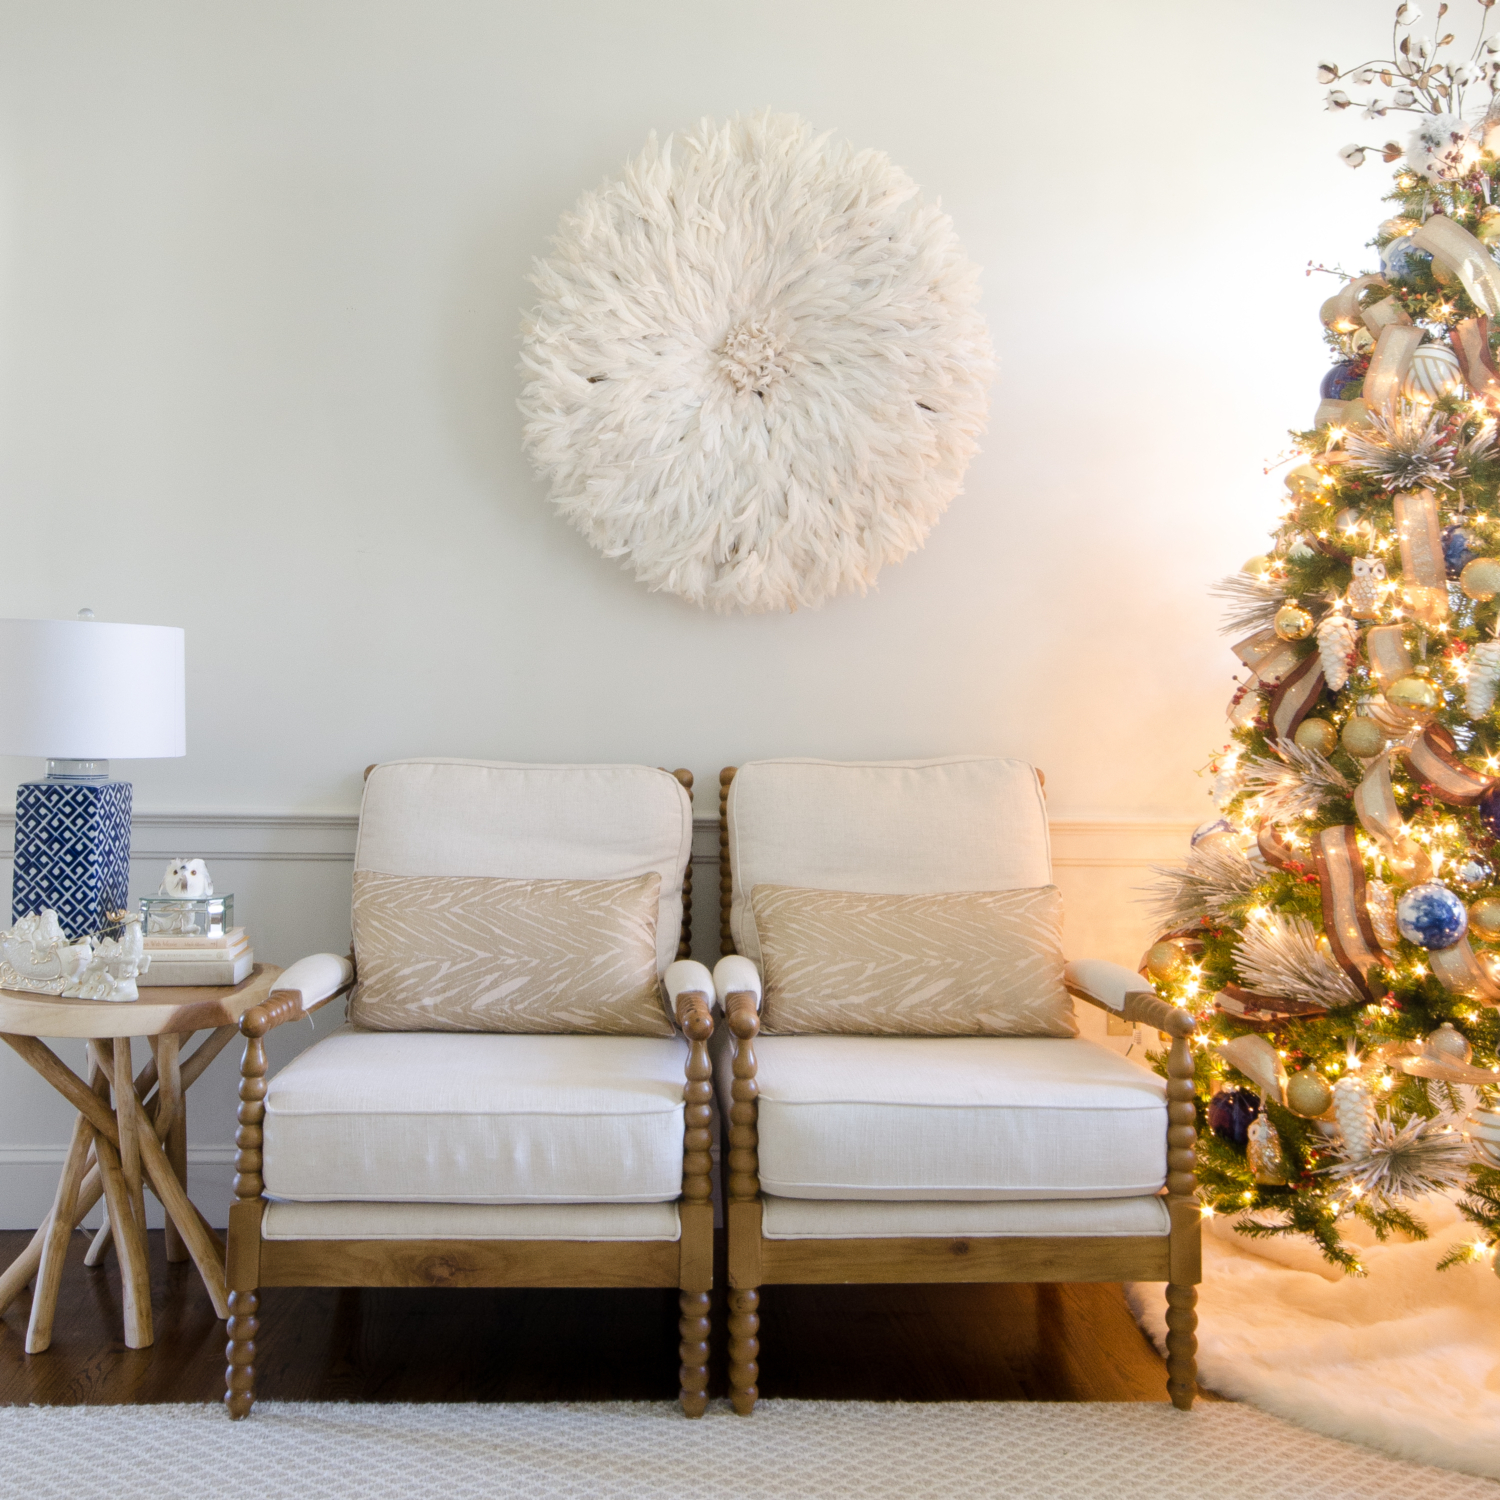 Magical Christmas living room with whites, neutrals, and blues.